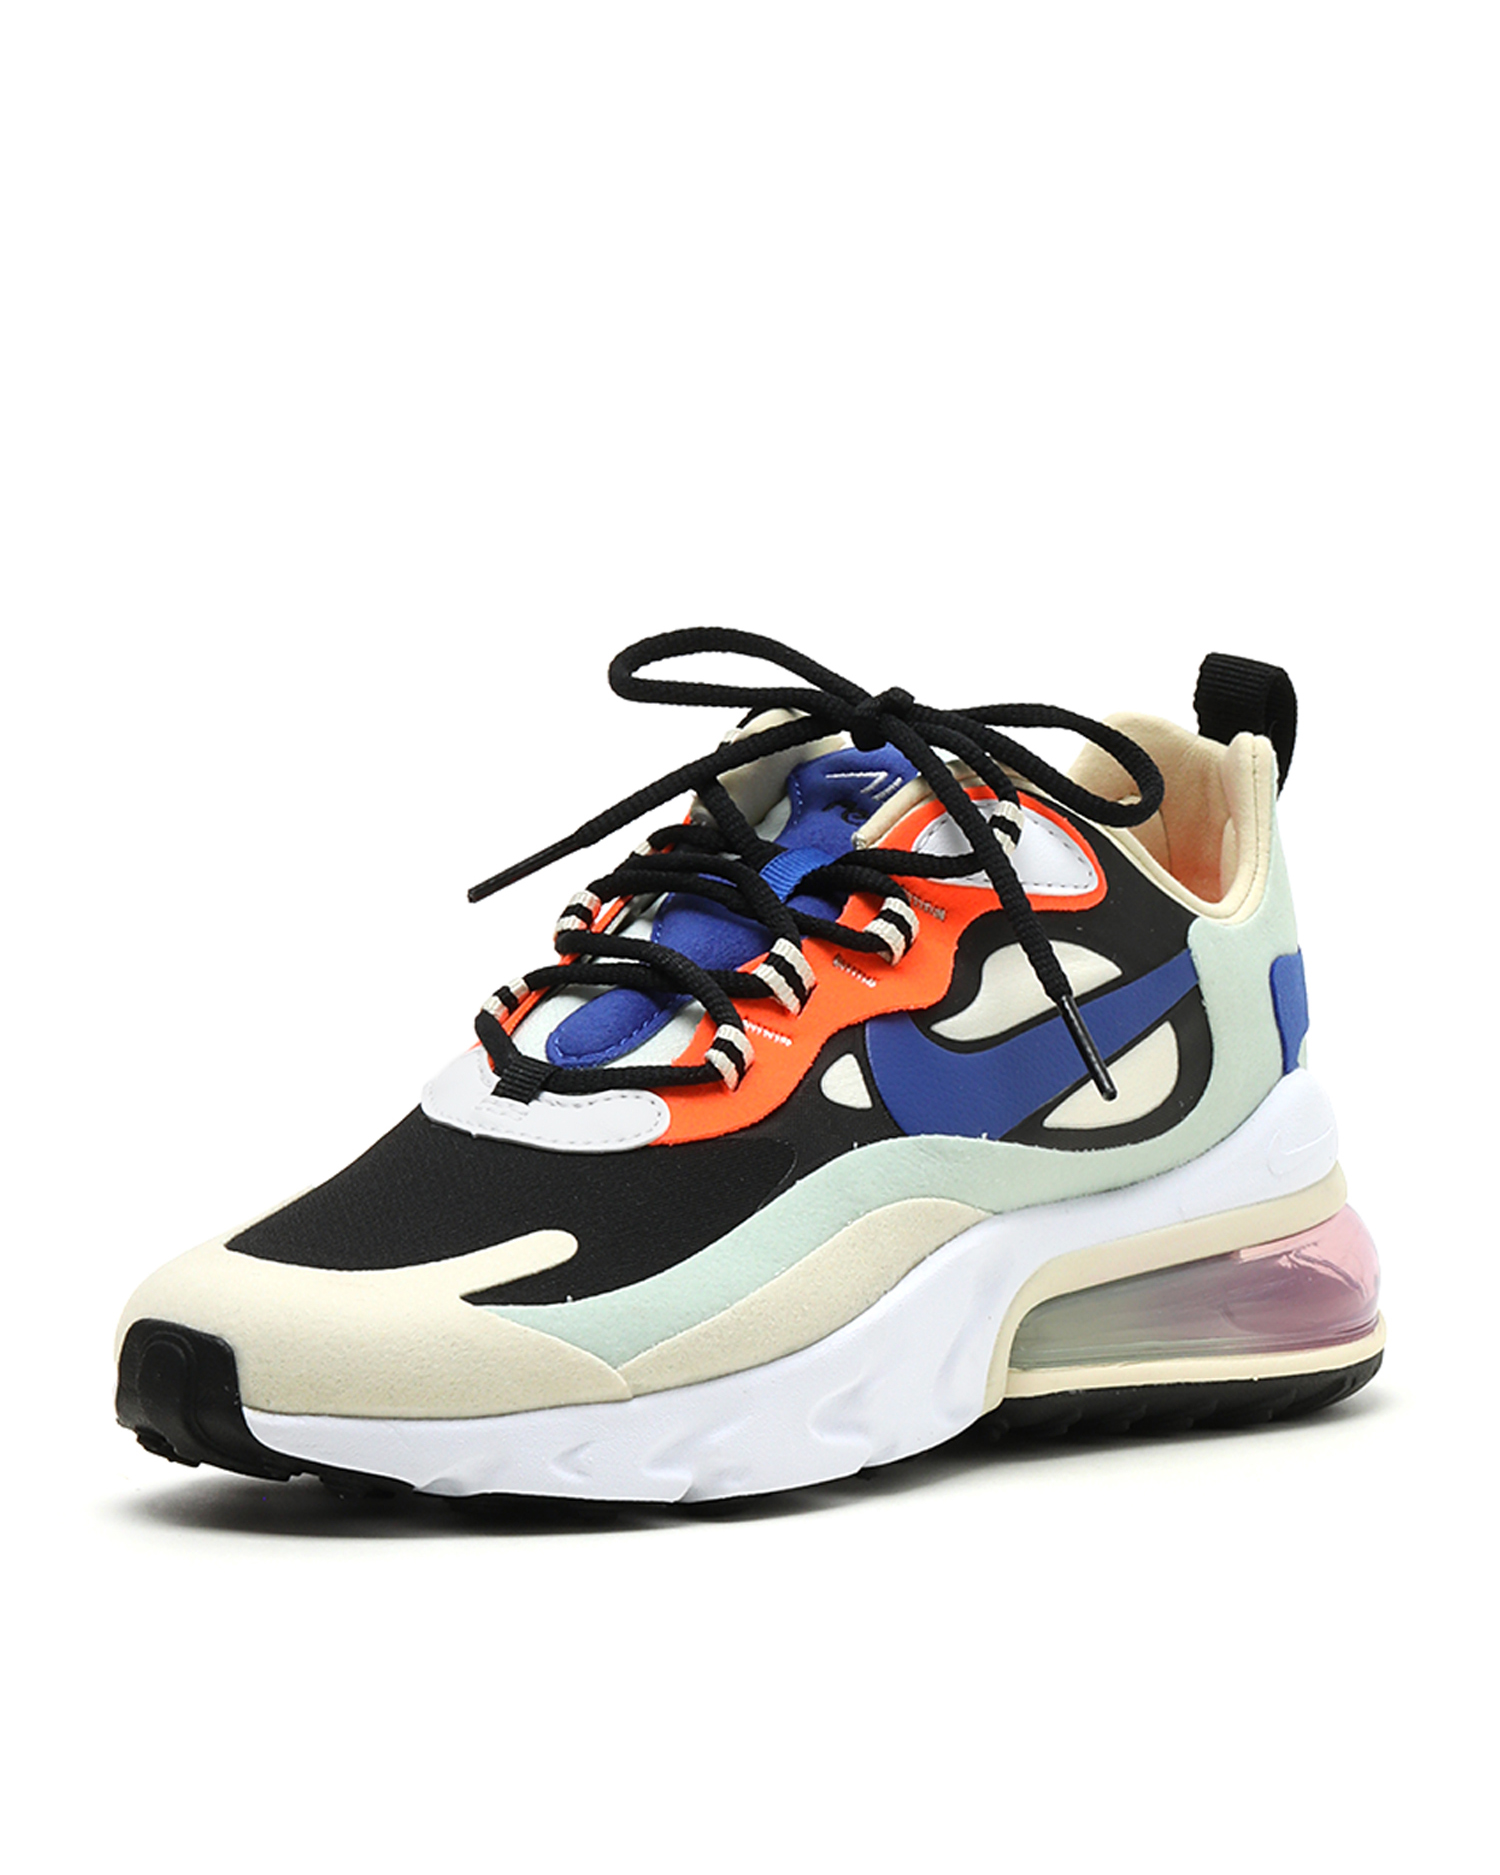 nike air max 270 offers